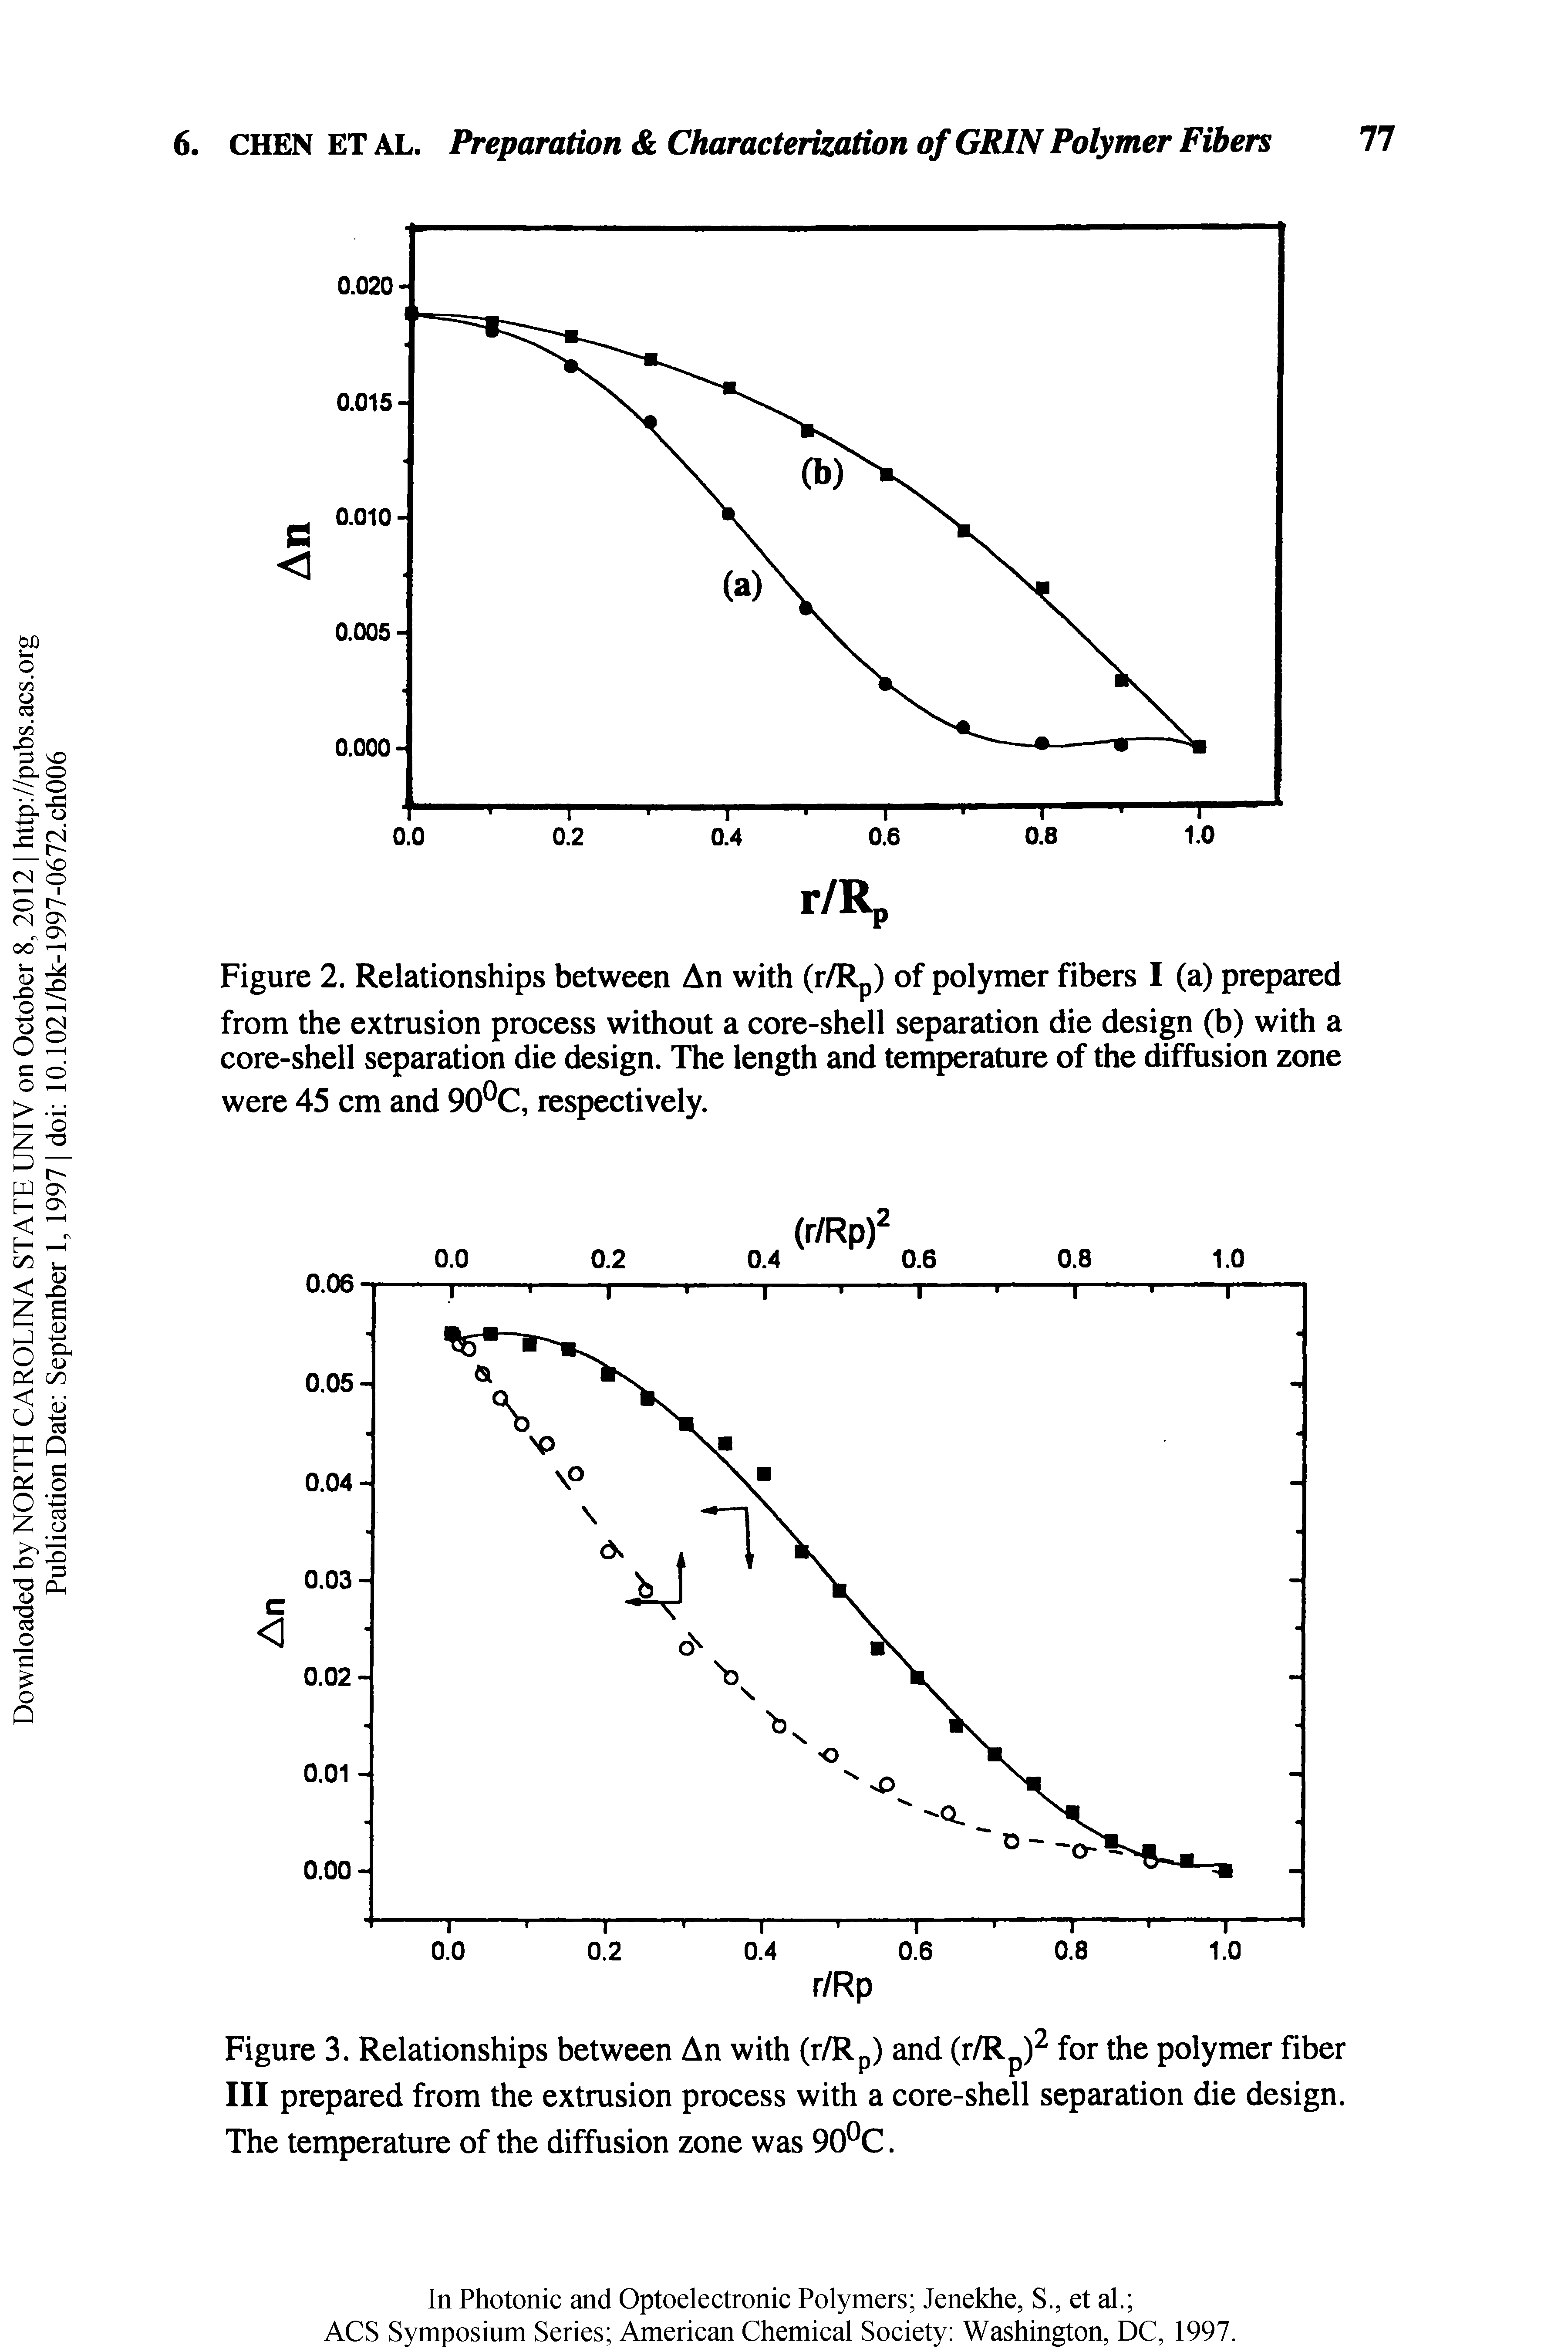 Figure 3. Relationships between An with (r/Rp) and (r/Rp) for the polymer fiber III prepared from the extrusion process with a core-shell separation die design. The temperature of the diffusion zone was 90 C.